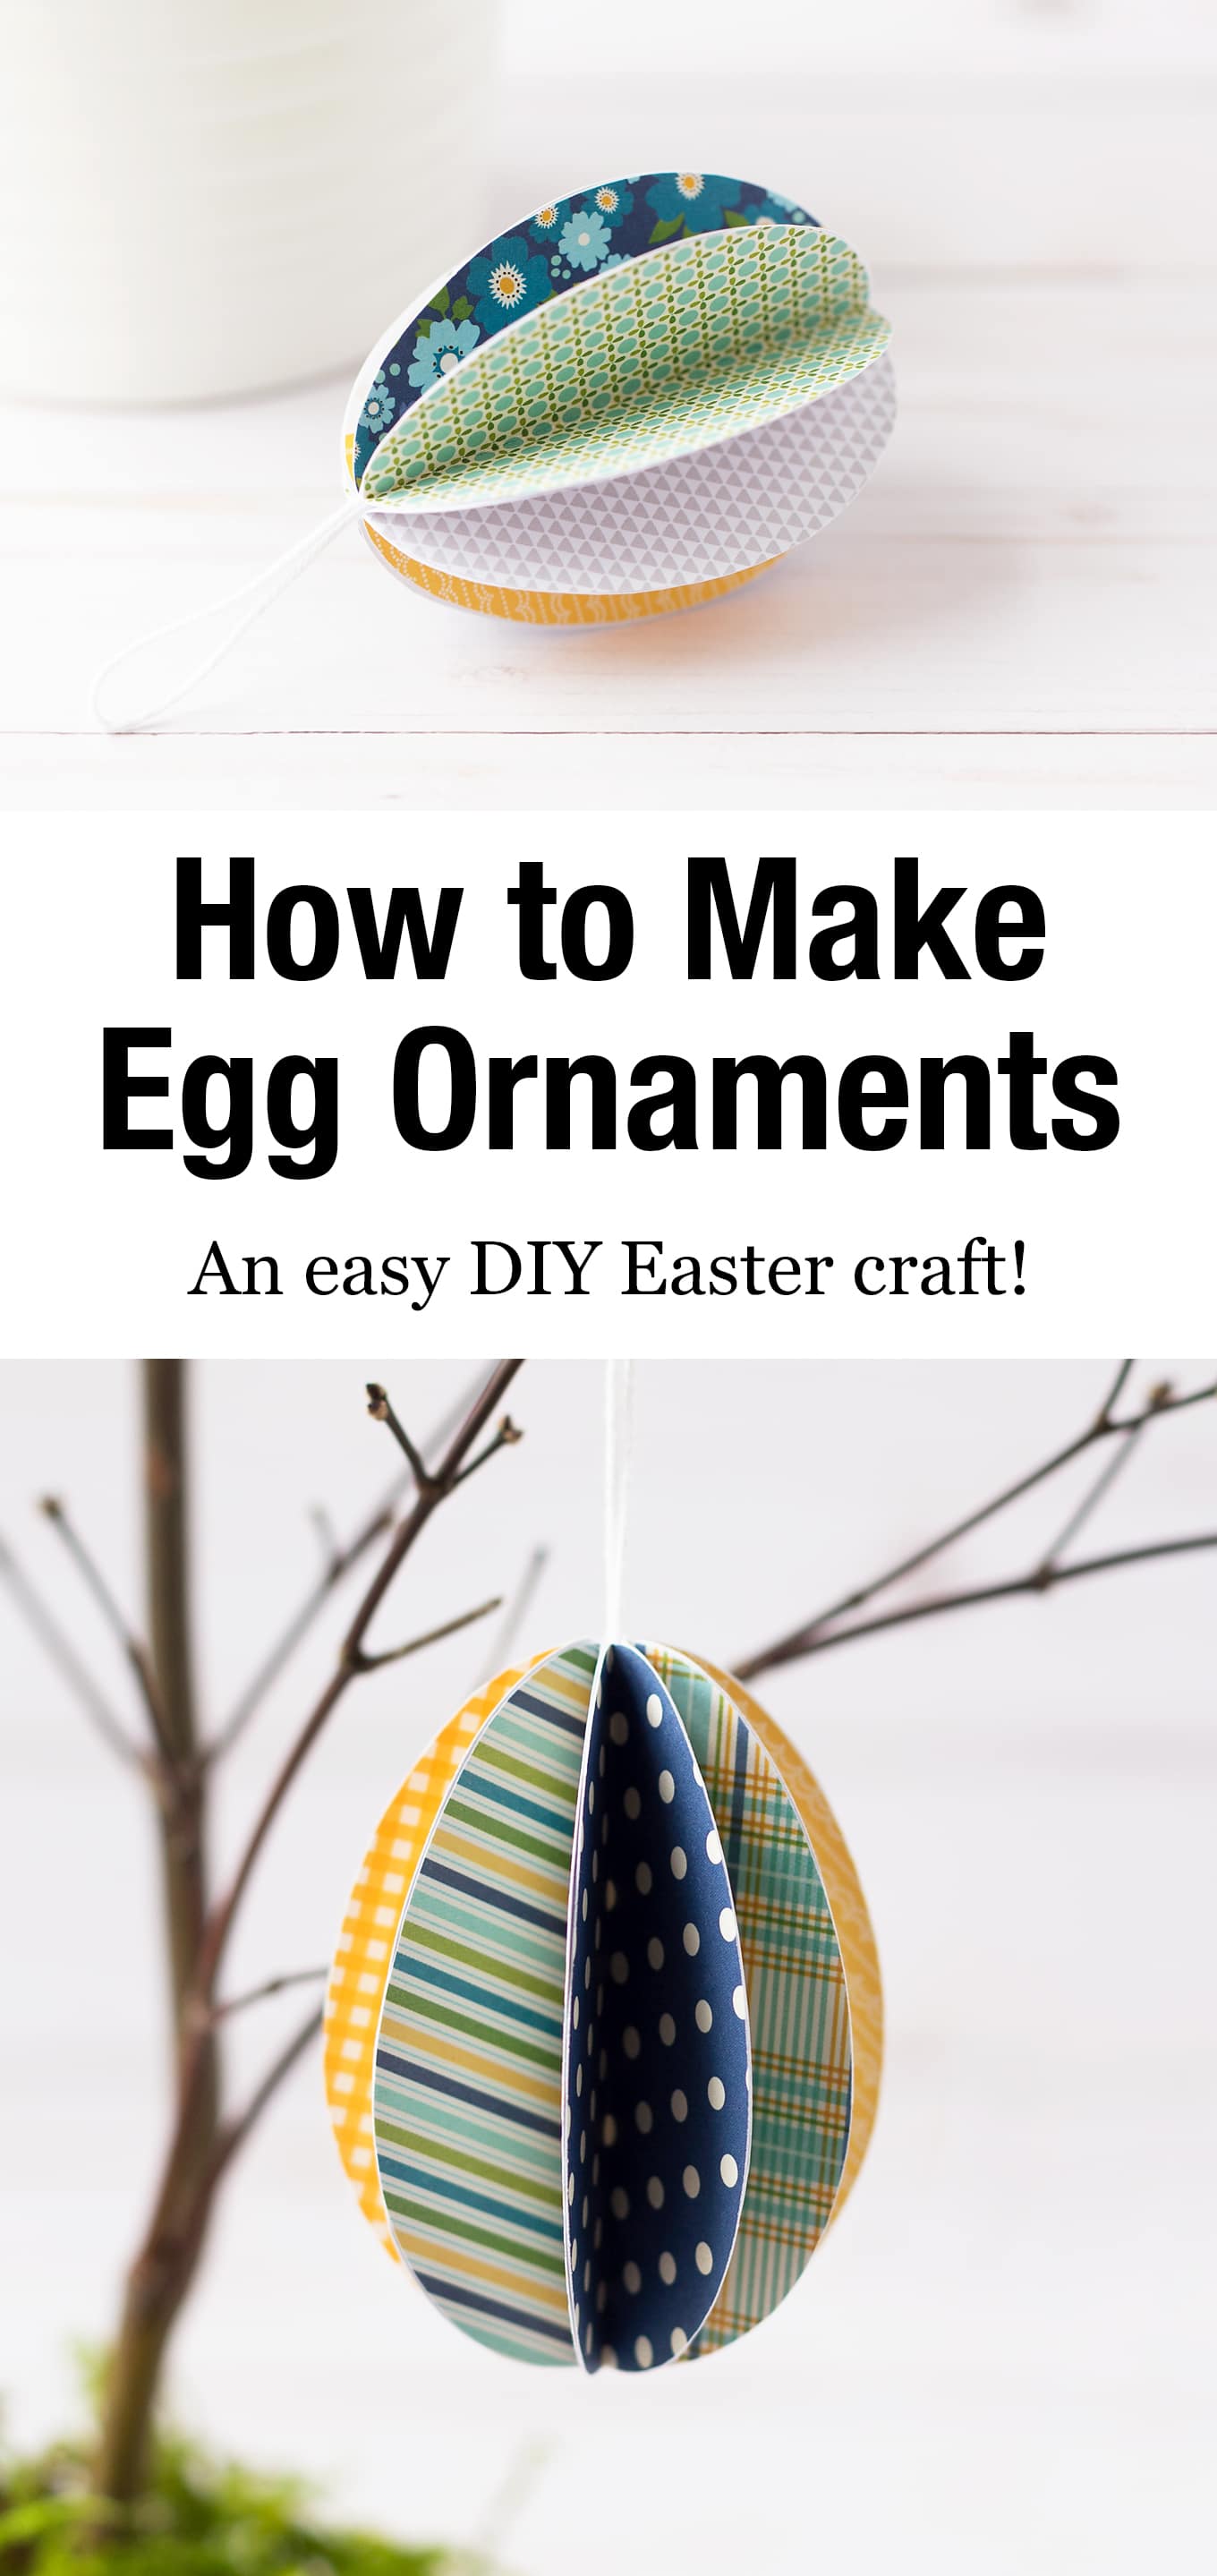 Use the free printable template to make beautiful 3D Paper Easter Egg Ornaments! It's the perfect Easter craft for kids of all ages! #eastereggornaments #papereggornaments #eastercraft #kidscrafts #3Dpapereggornaments via @firefliesandmudpies